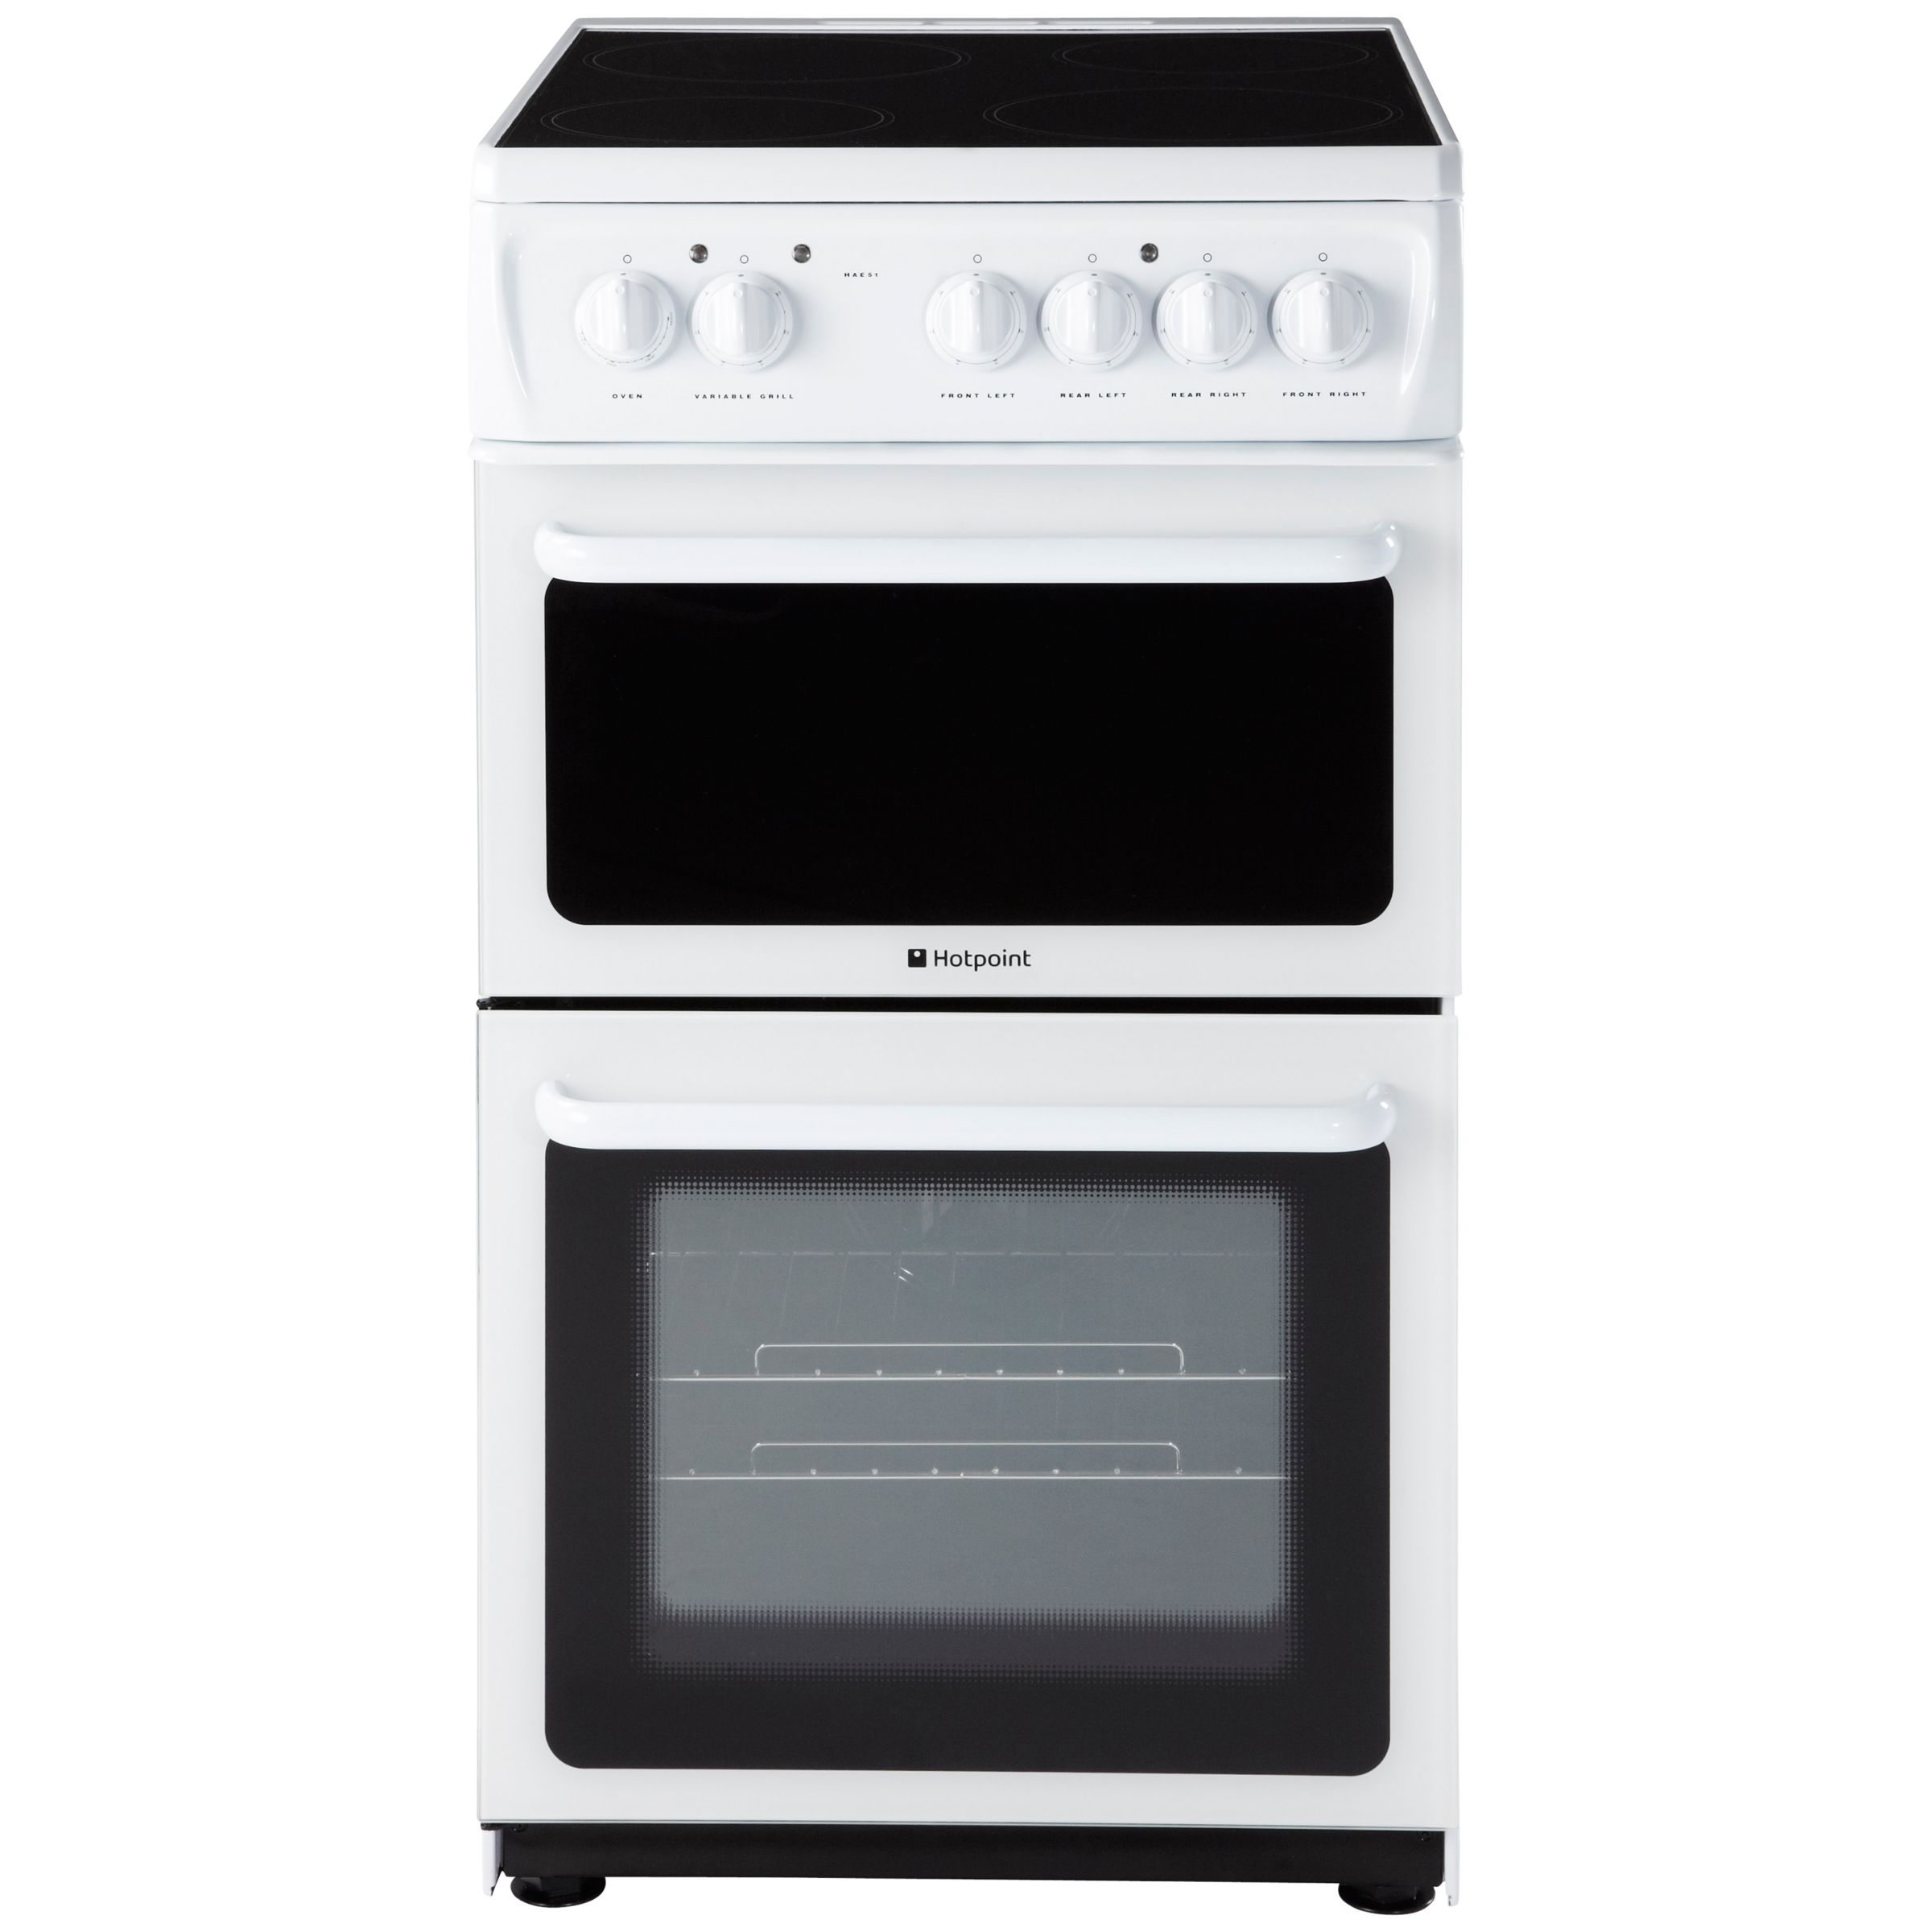 white freestanding electric cooker